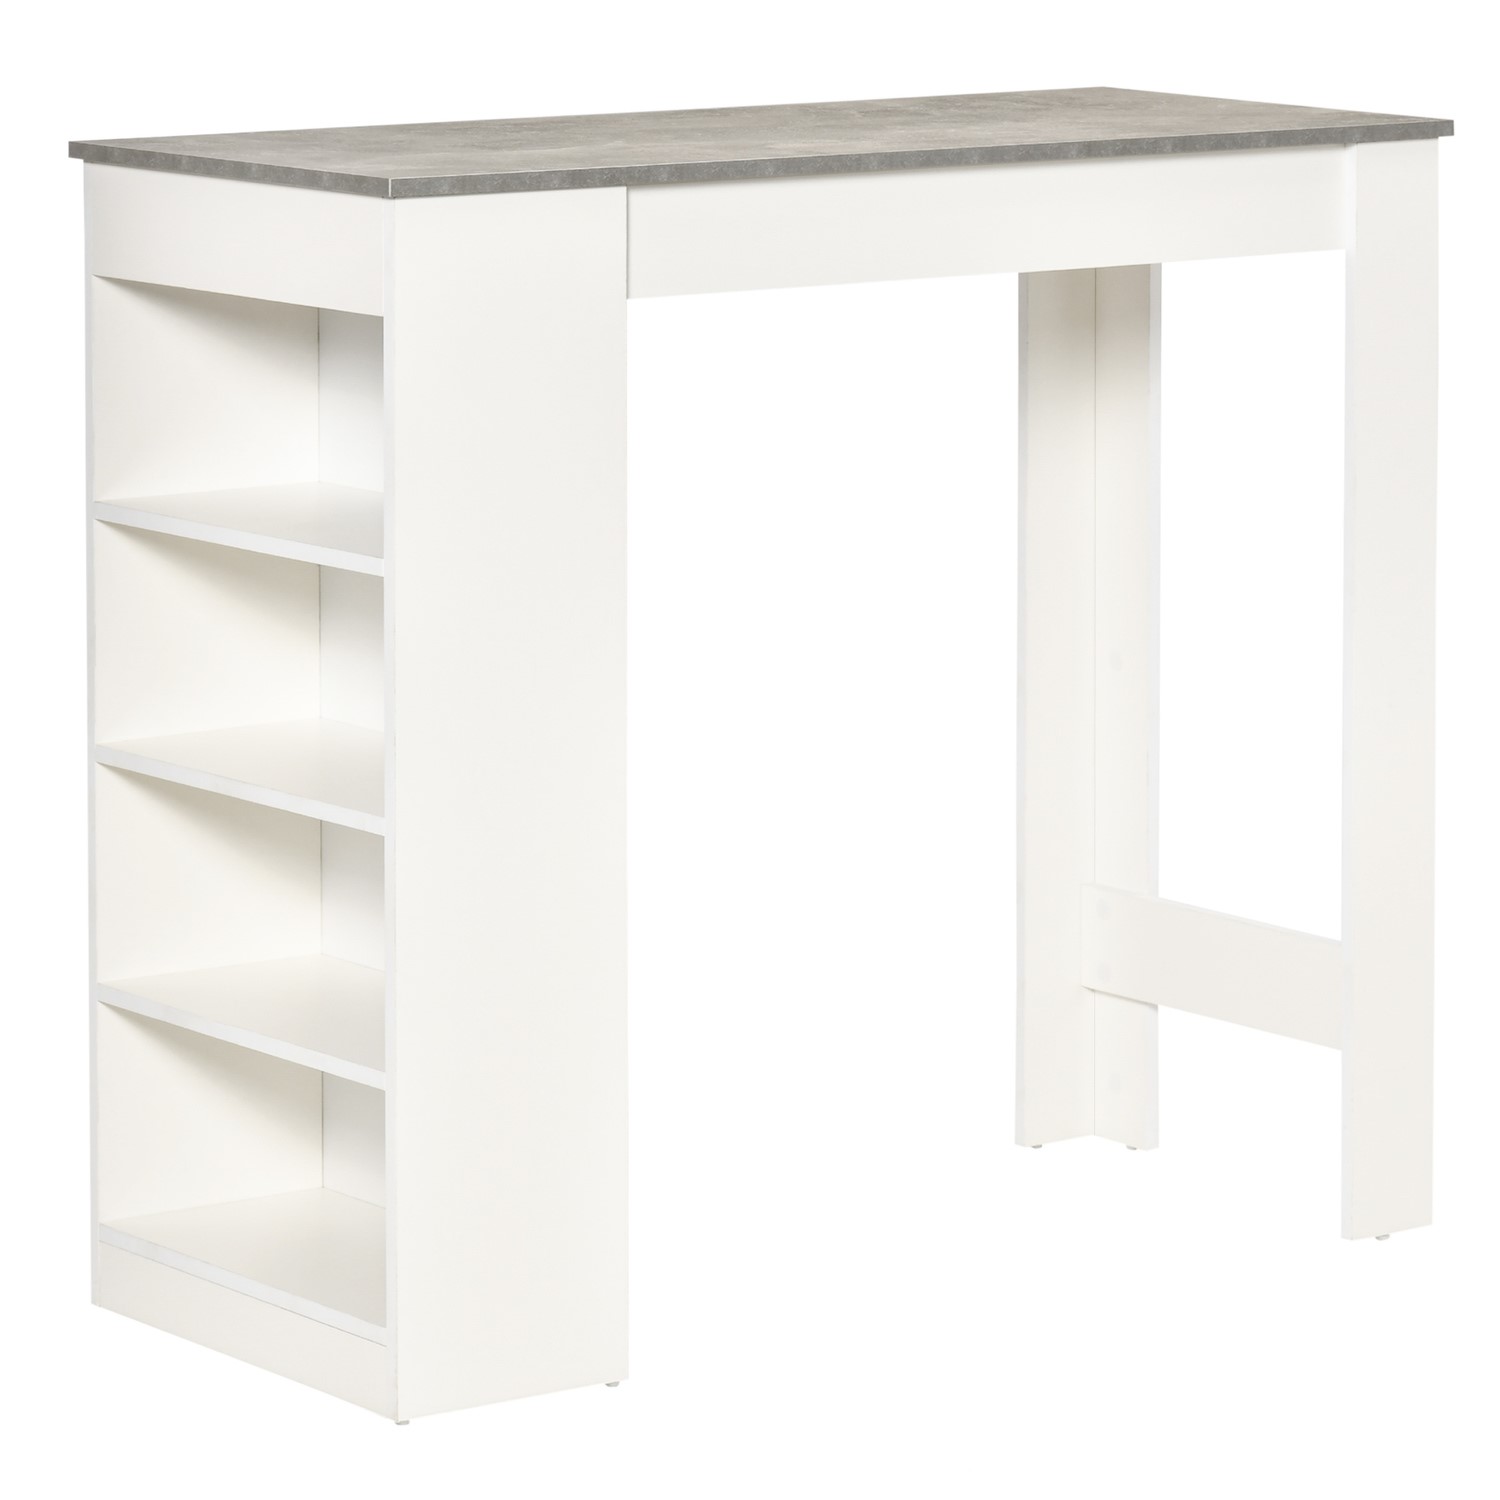 Read more about White breakfast bar table with storage seats 2 ryder